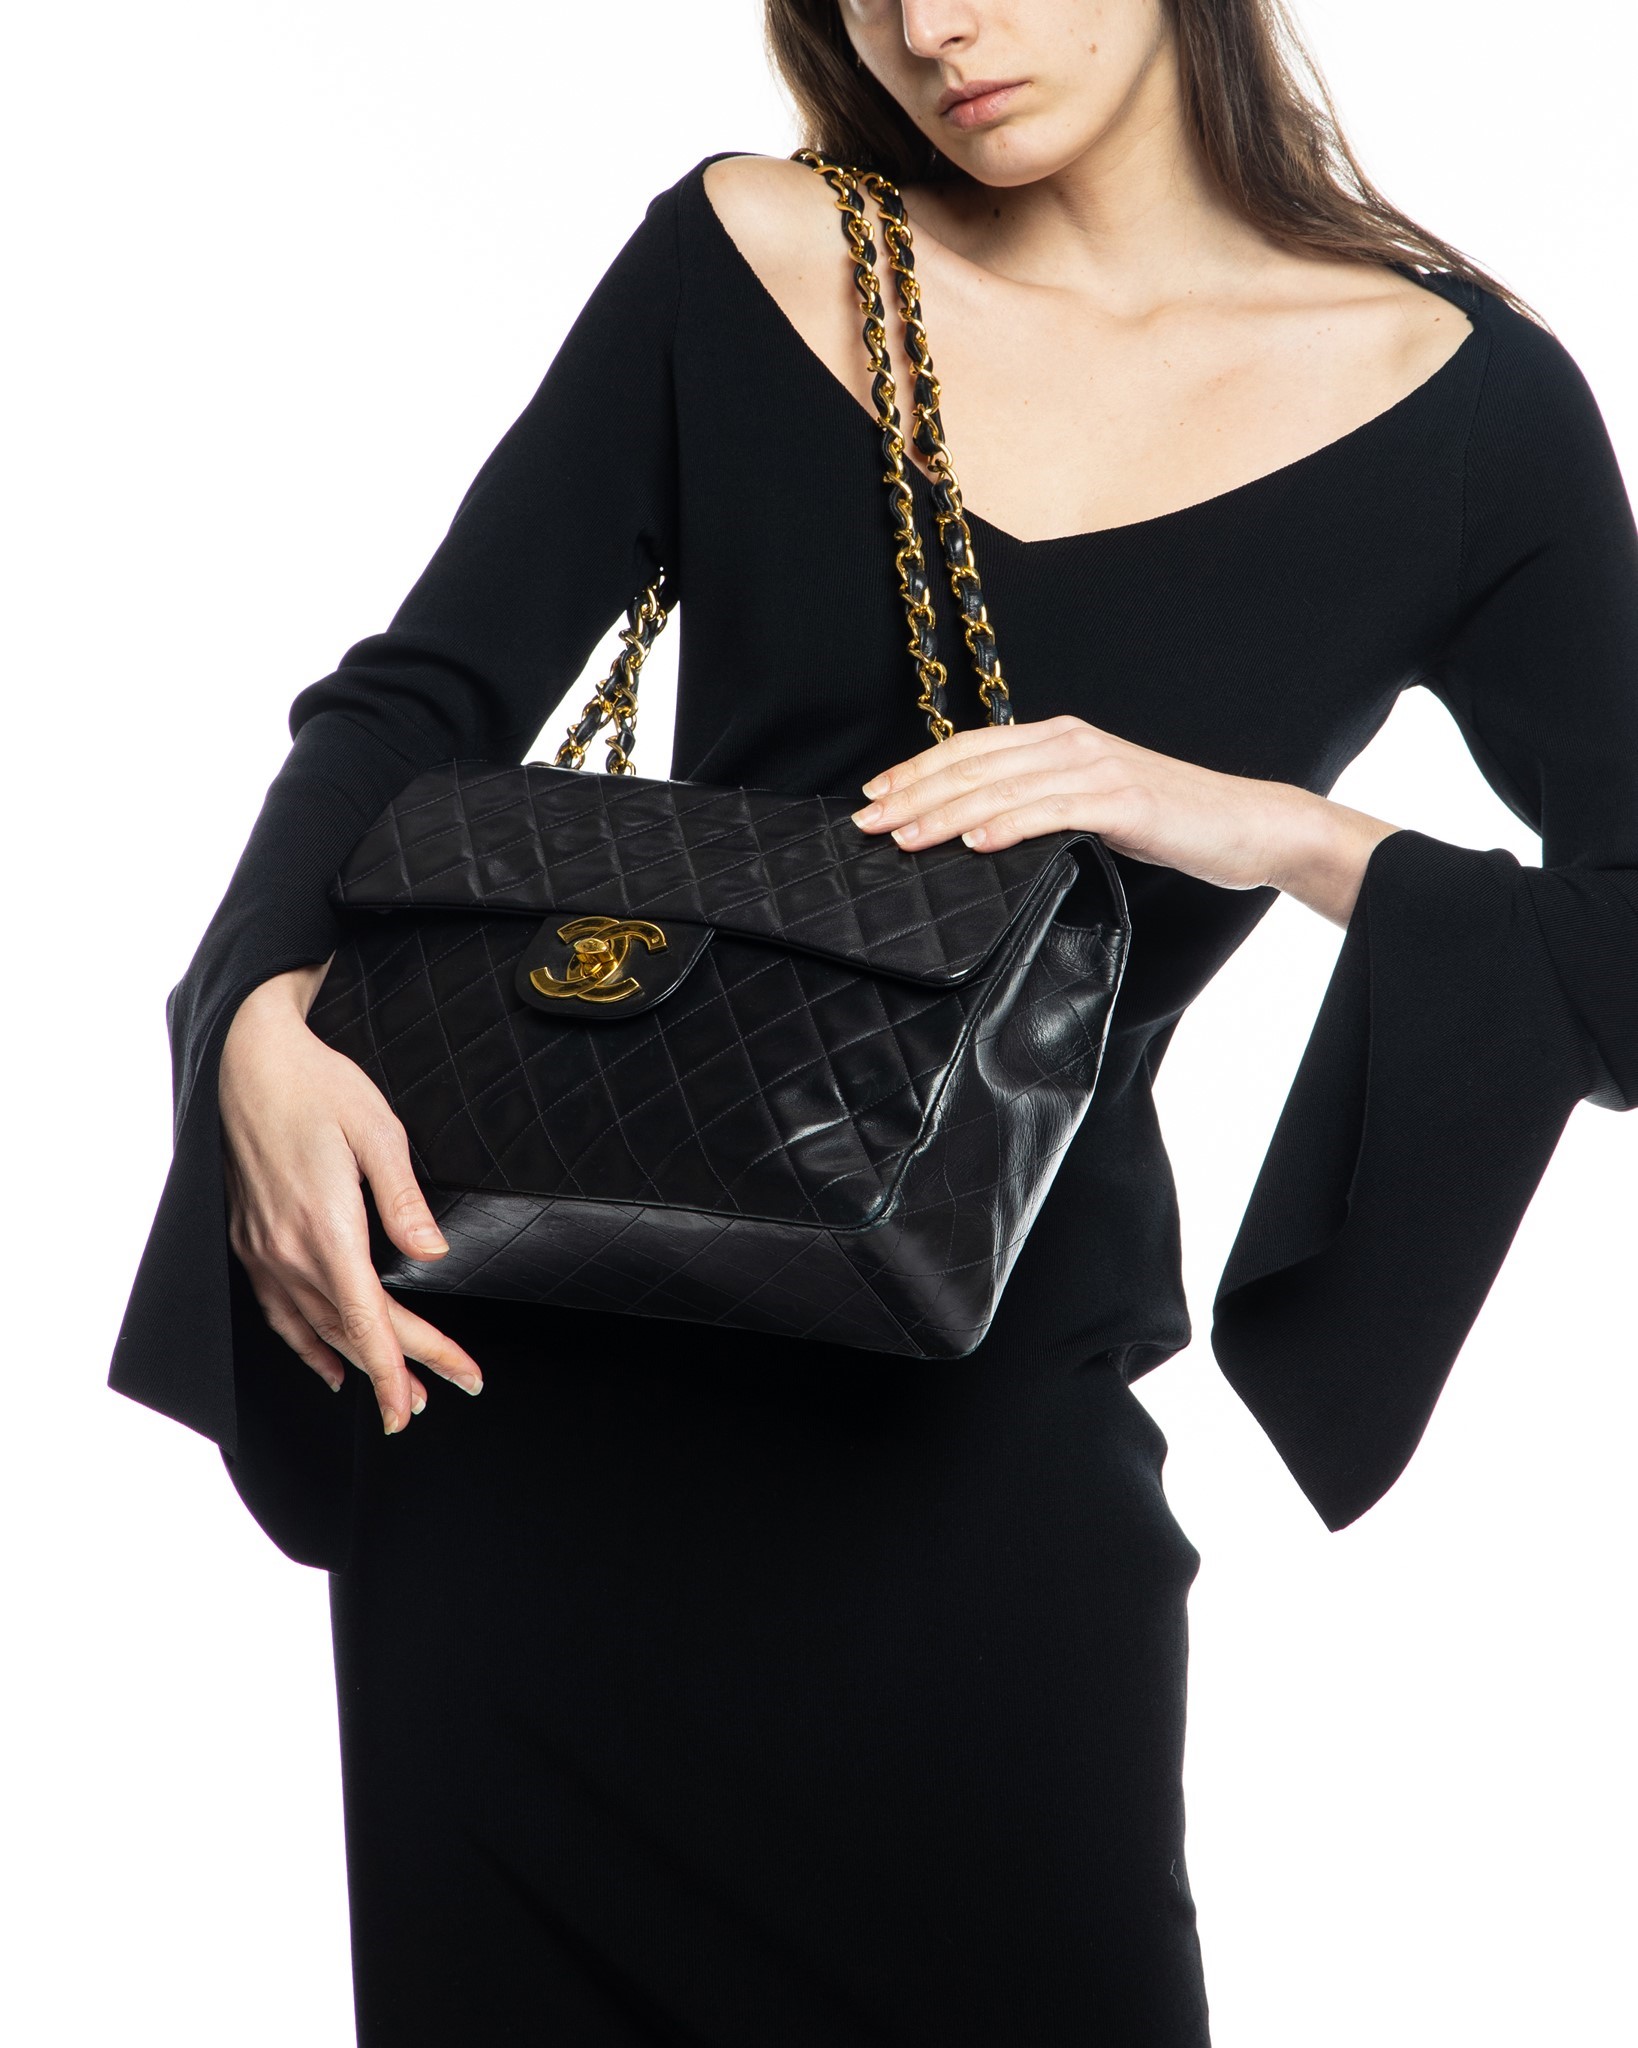 Nass boutique is a multi-brand boutique curating women's clothing and  accessoriesVINTAGE CHANEL JUMBO BAG